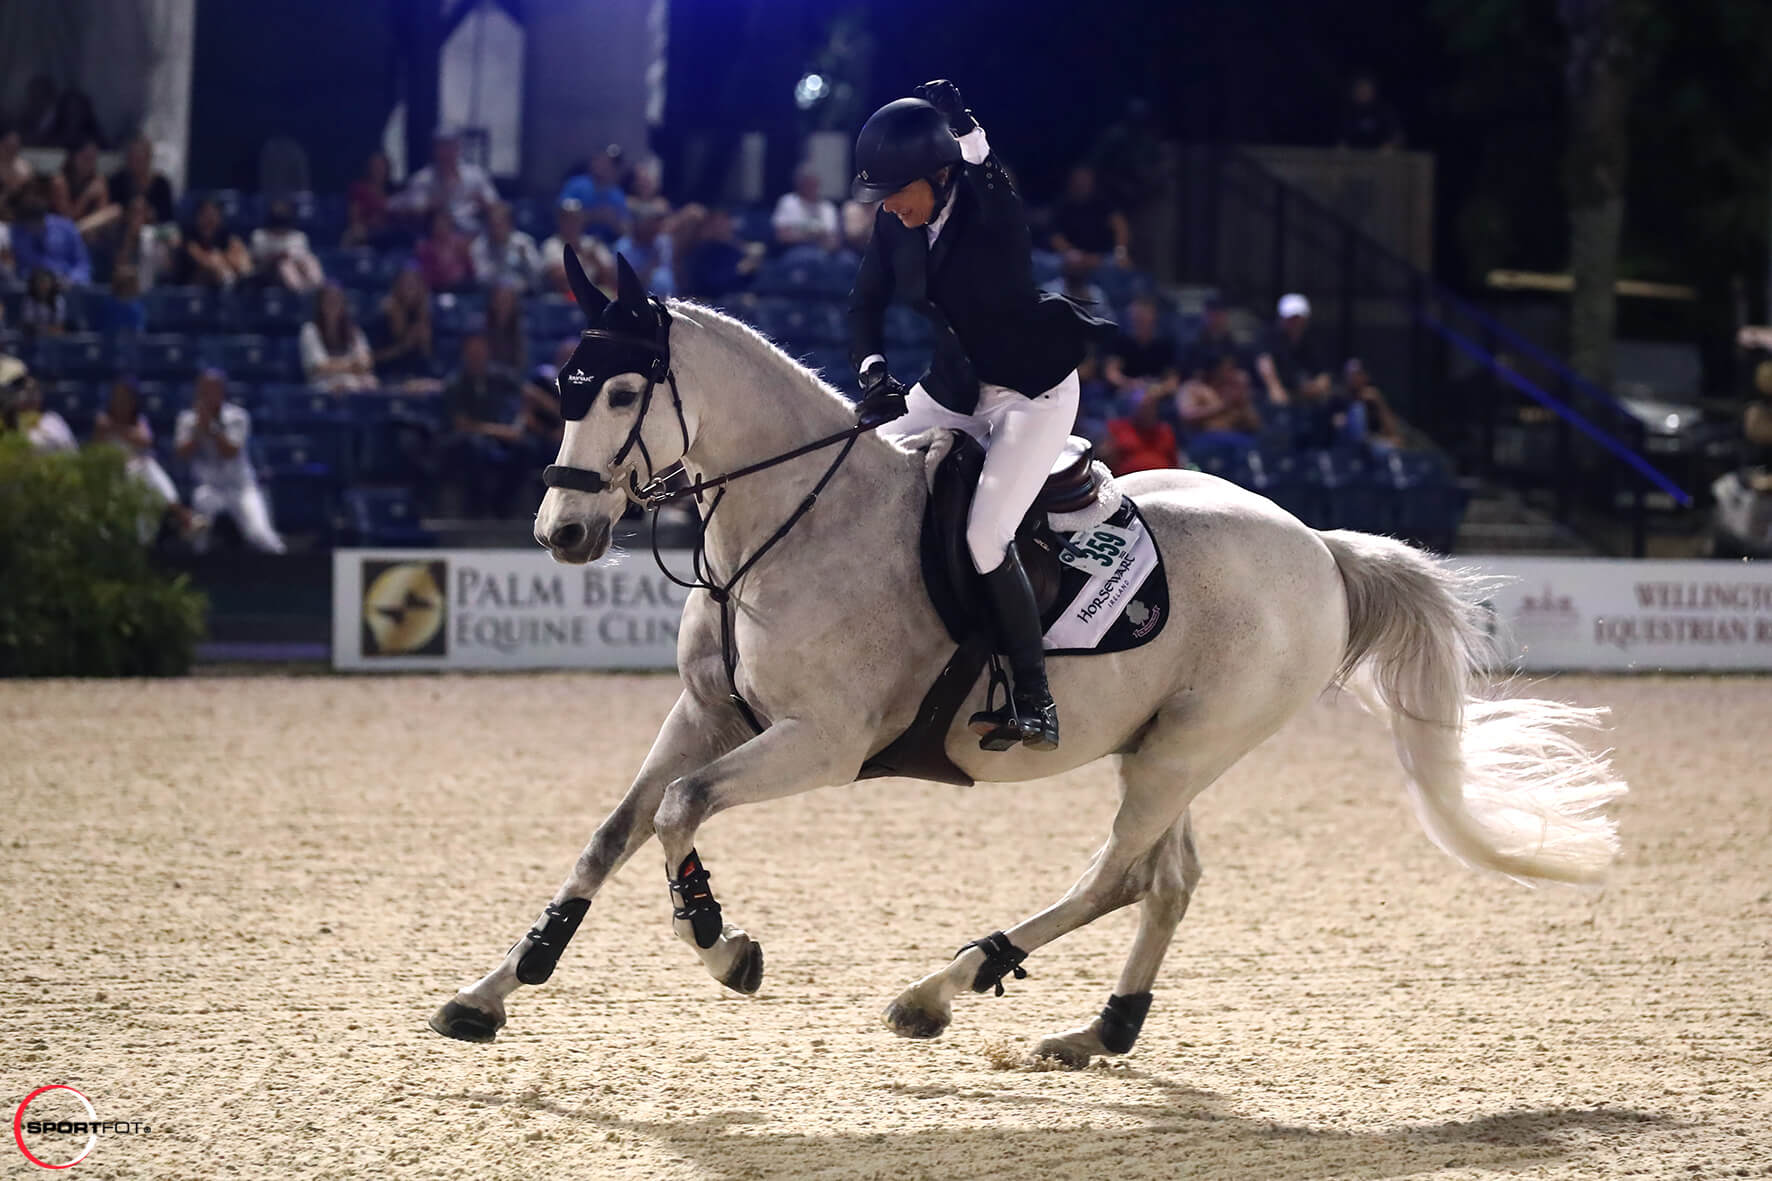 Laura Kraut and Confu conquer WEF 10 Grand Prix. "A few months we thought we lost him...."